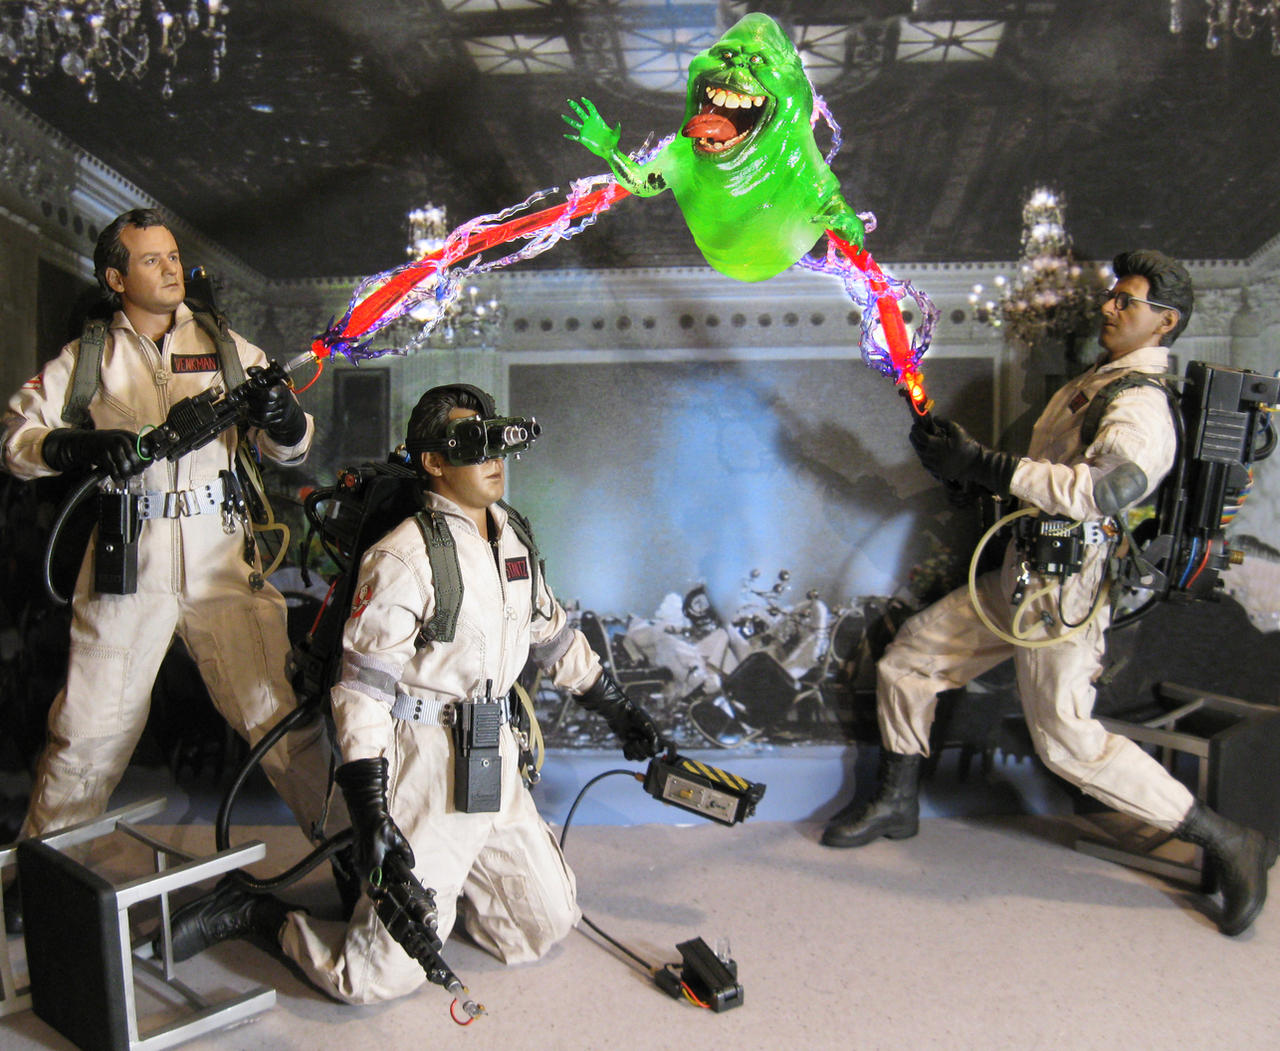 ghostbusters_catching_the_little_green_spud_by_thedollknight-dbwfduj.jpg